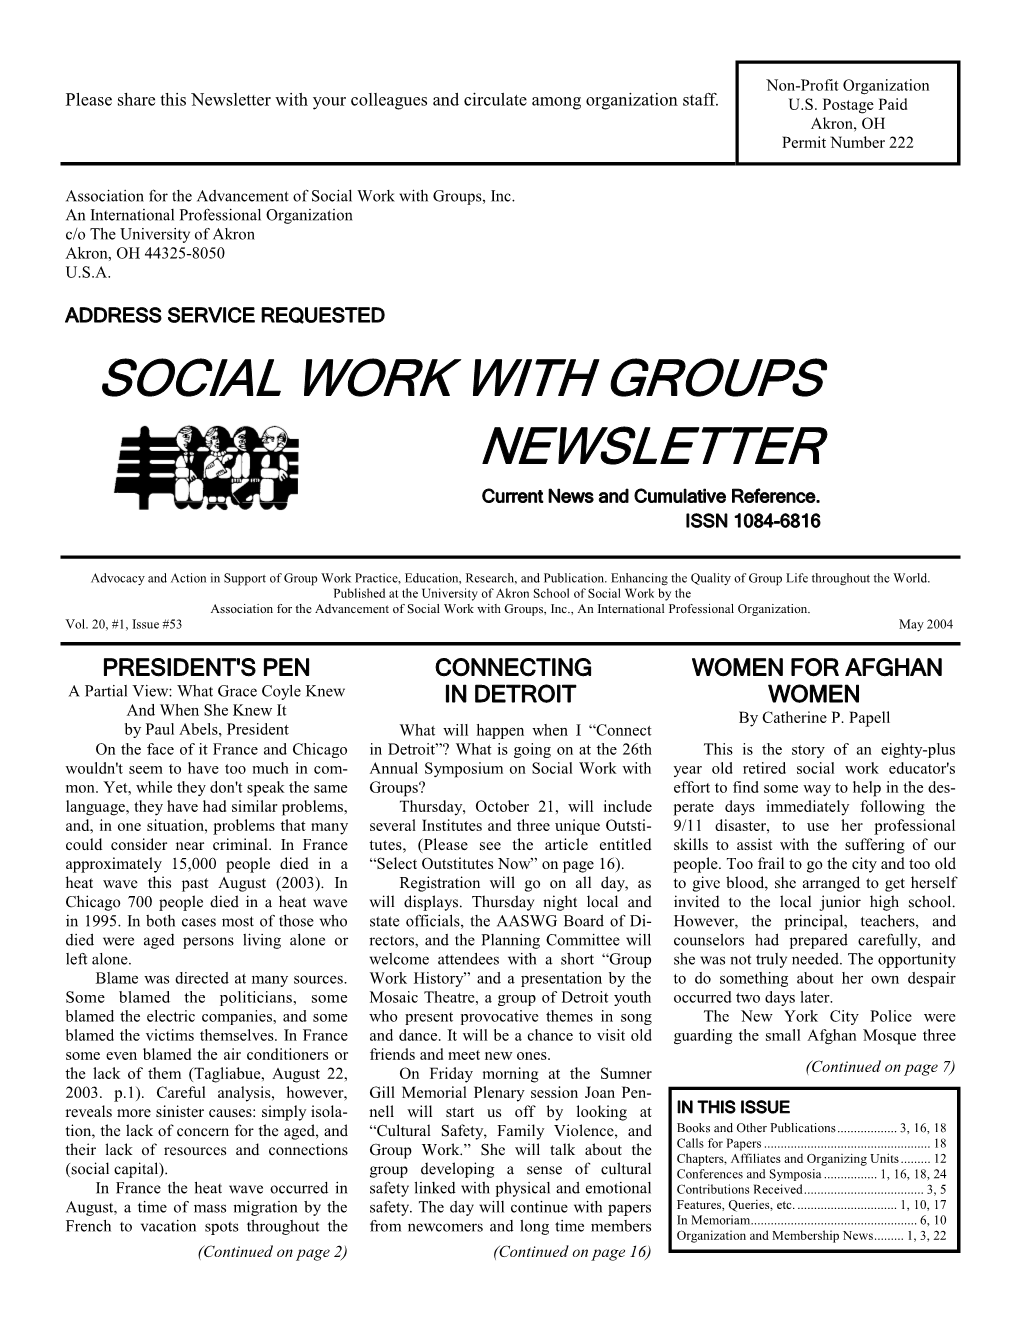 SOCIAL WORK with GROUPS NEWSLETTER Current News and Cumulative Reference